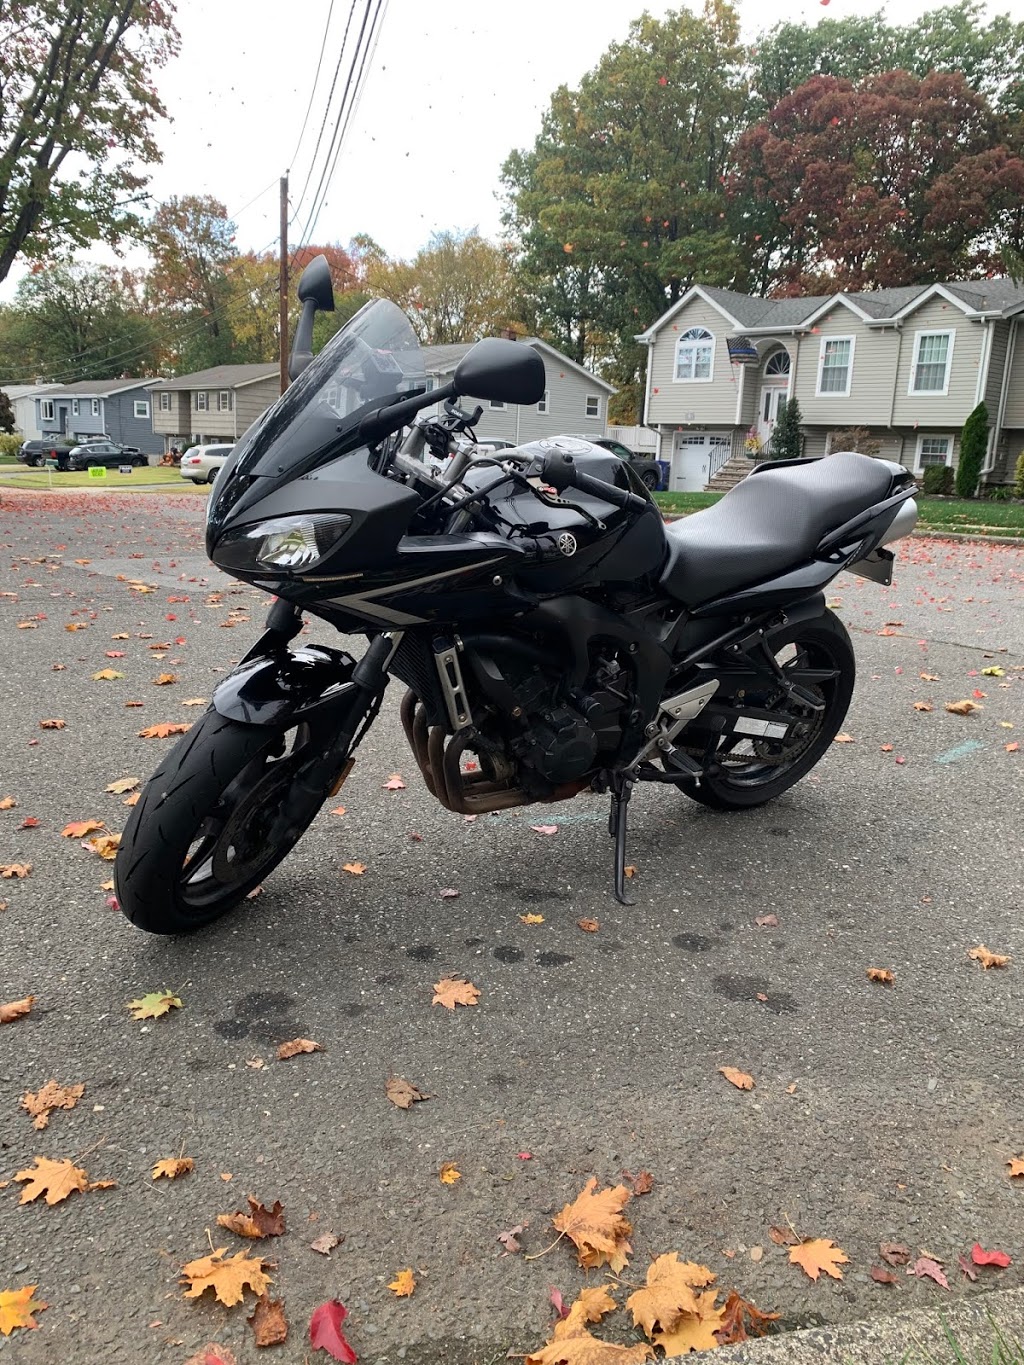 American Motorcycle | 2 Belmont Ave, Paterson, NJ 07522 | Phone: (973) 942-4161